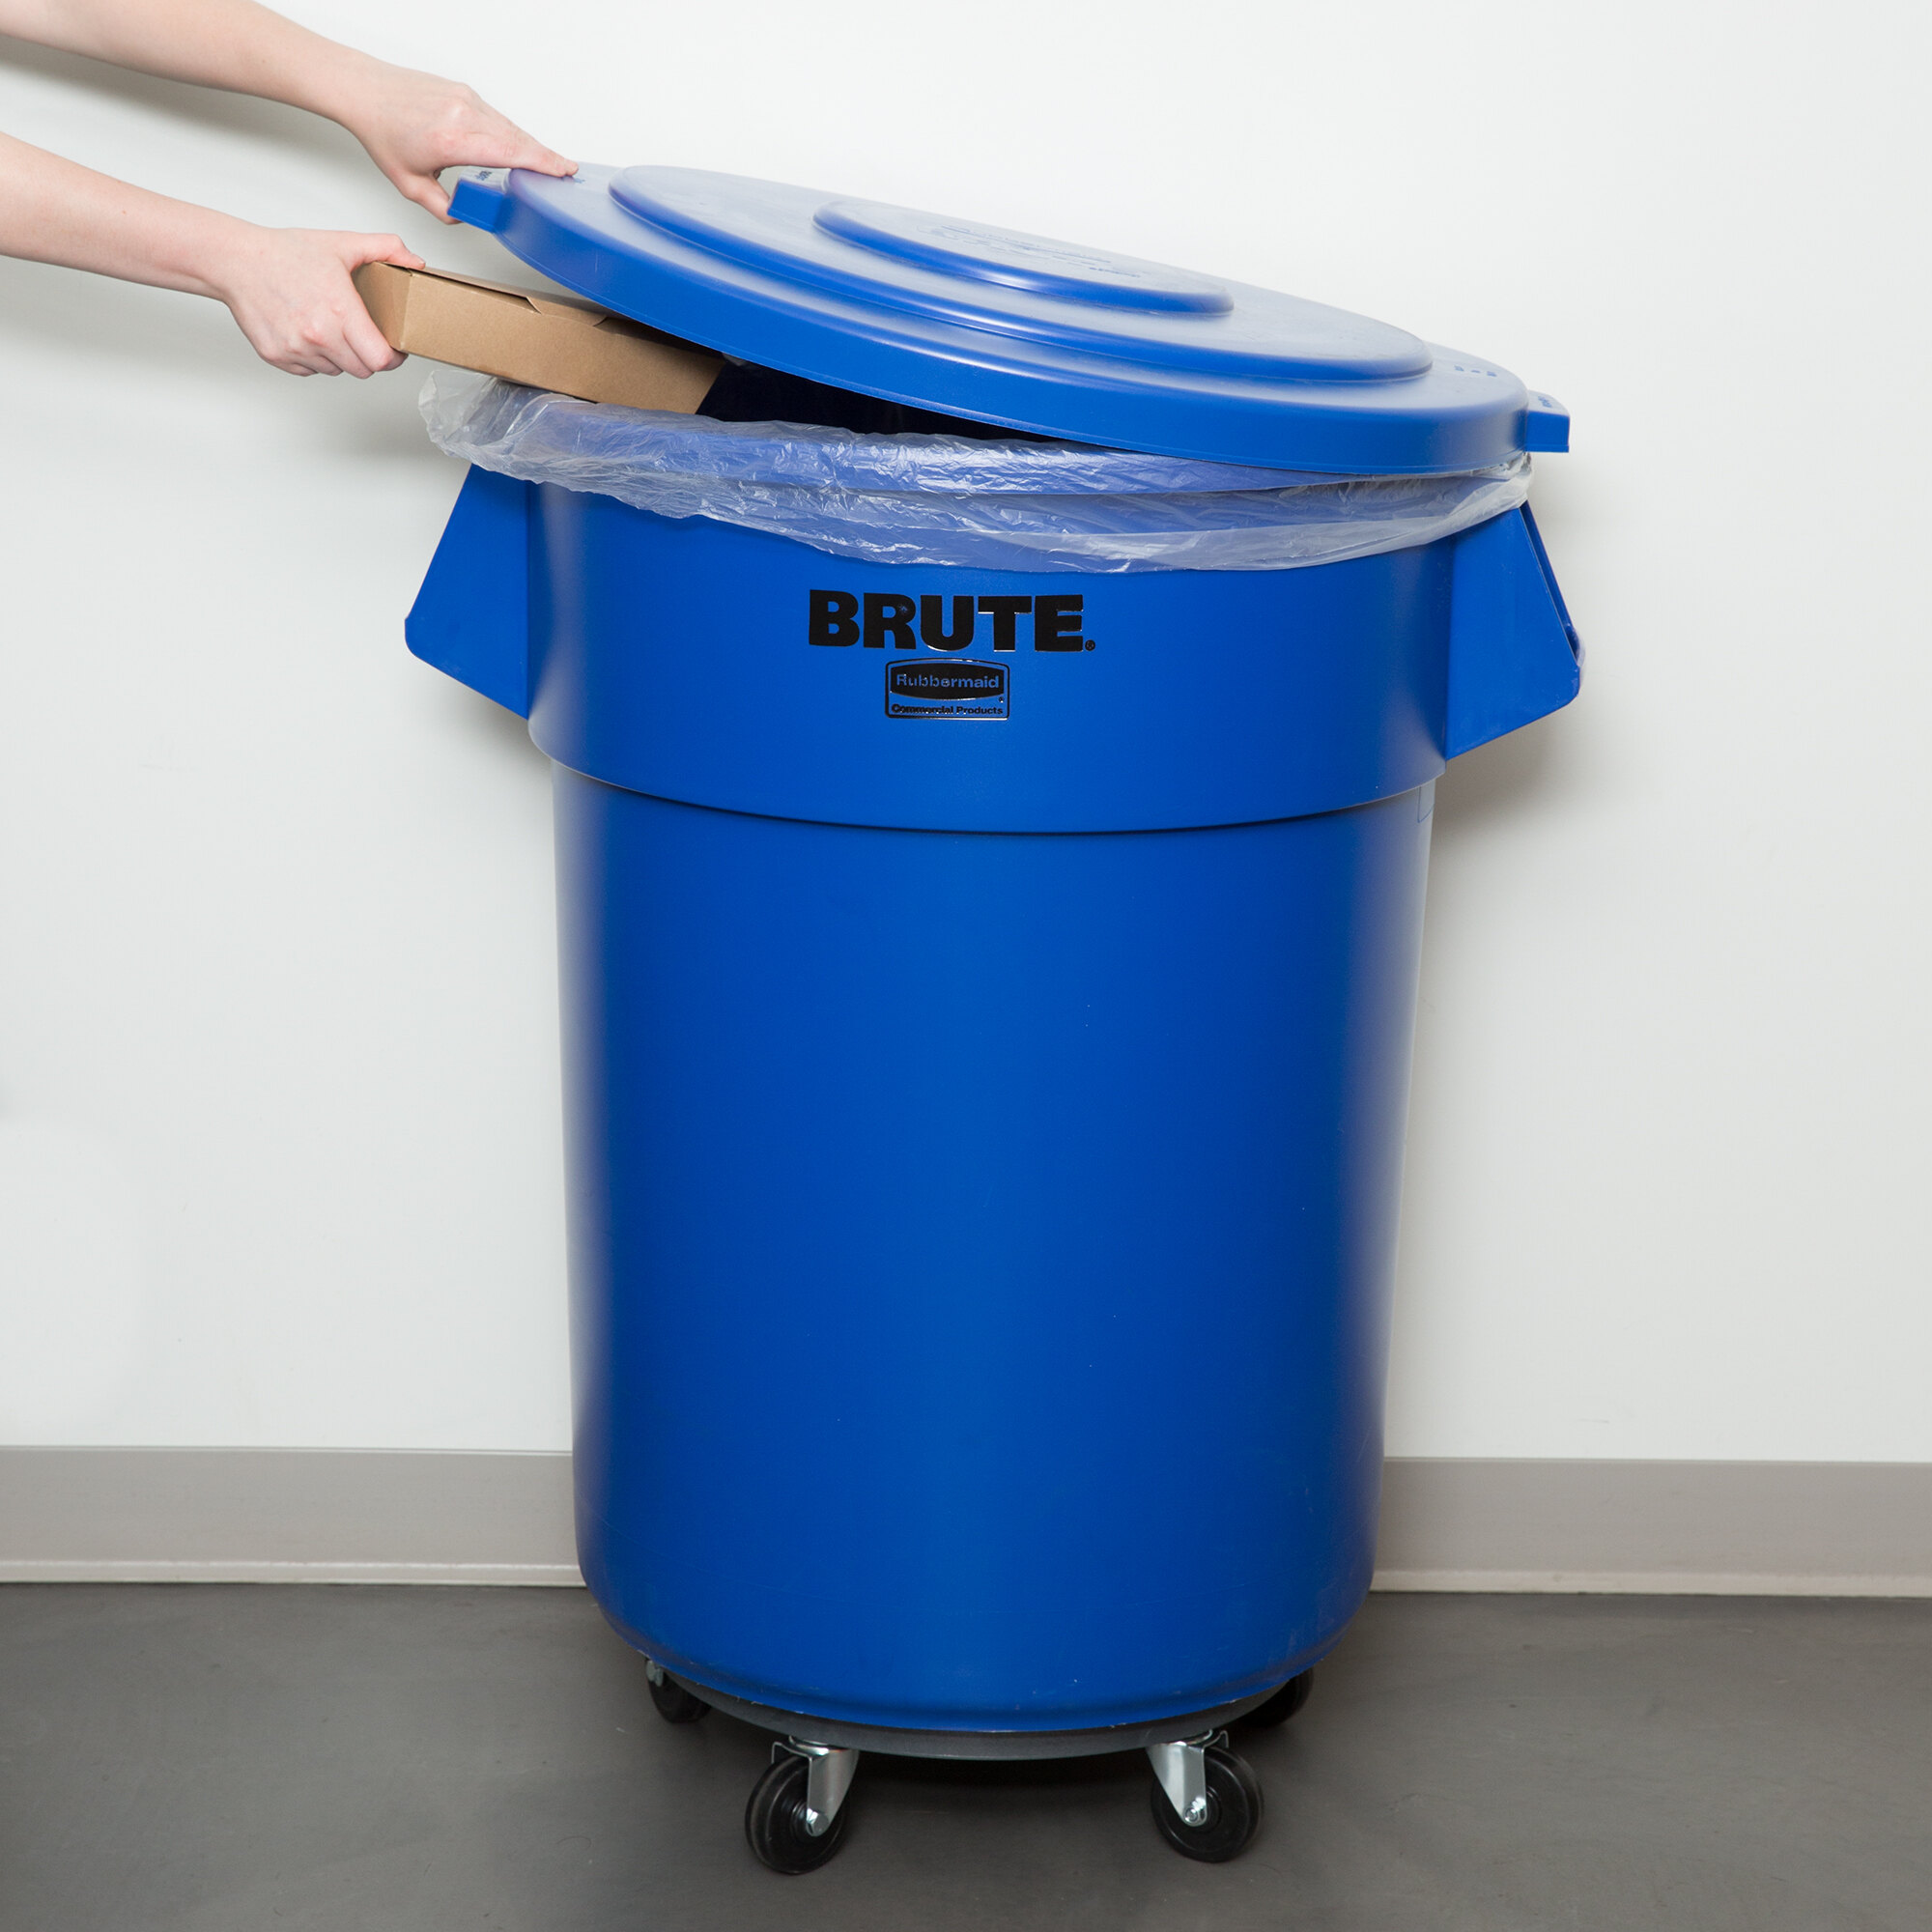 Rubbermaid Brute Gallon Blue Round Recycling Can And Lid | My XXX Hot Girl